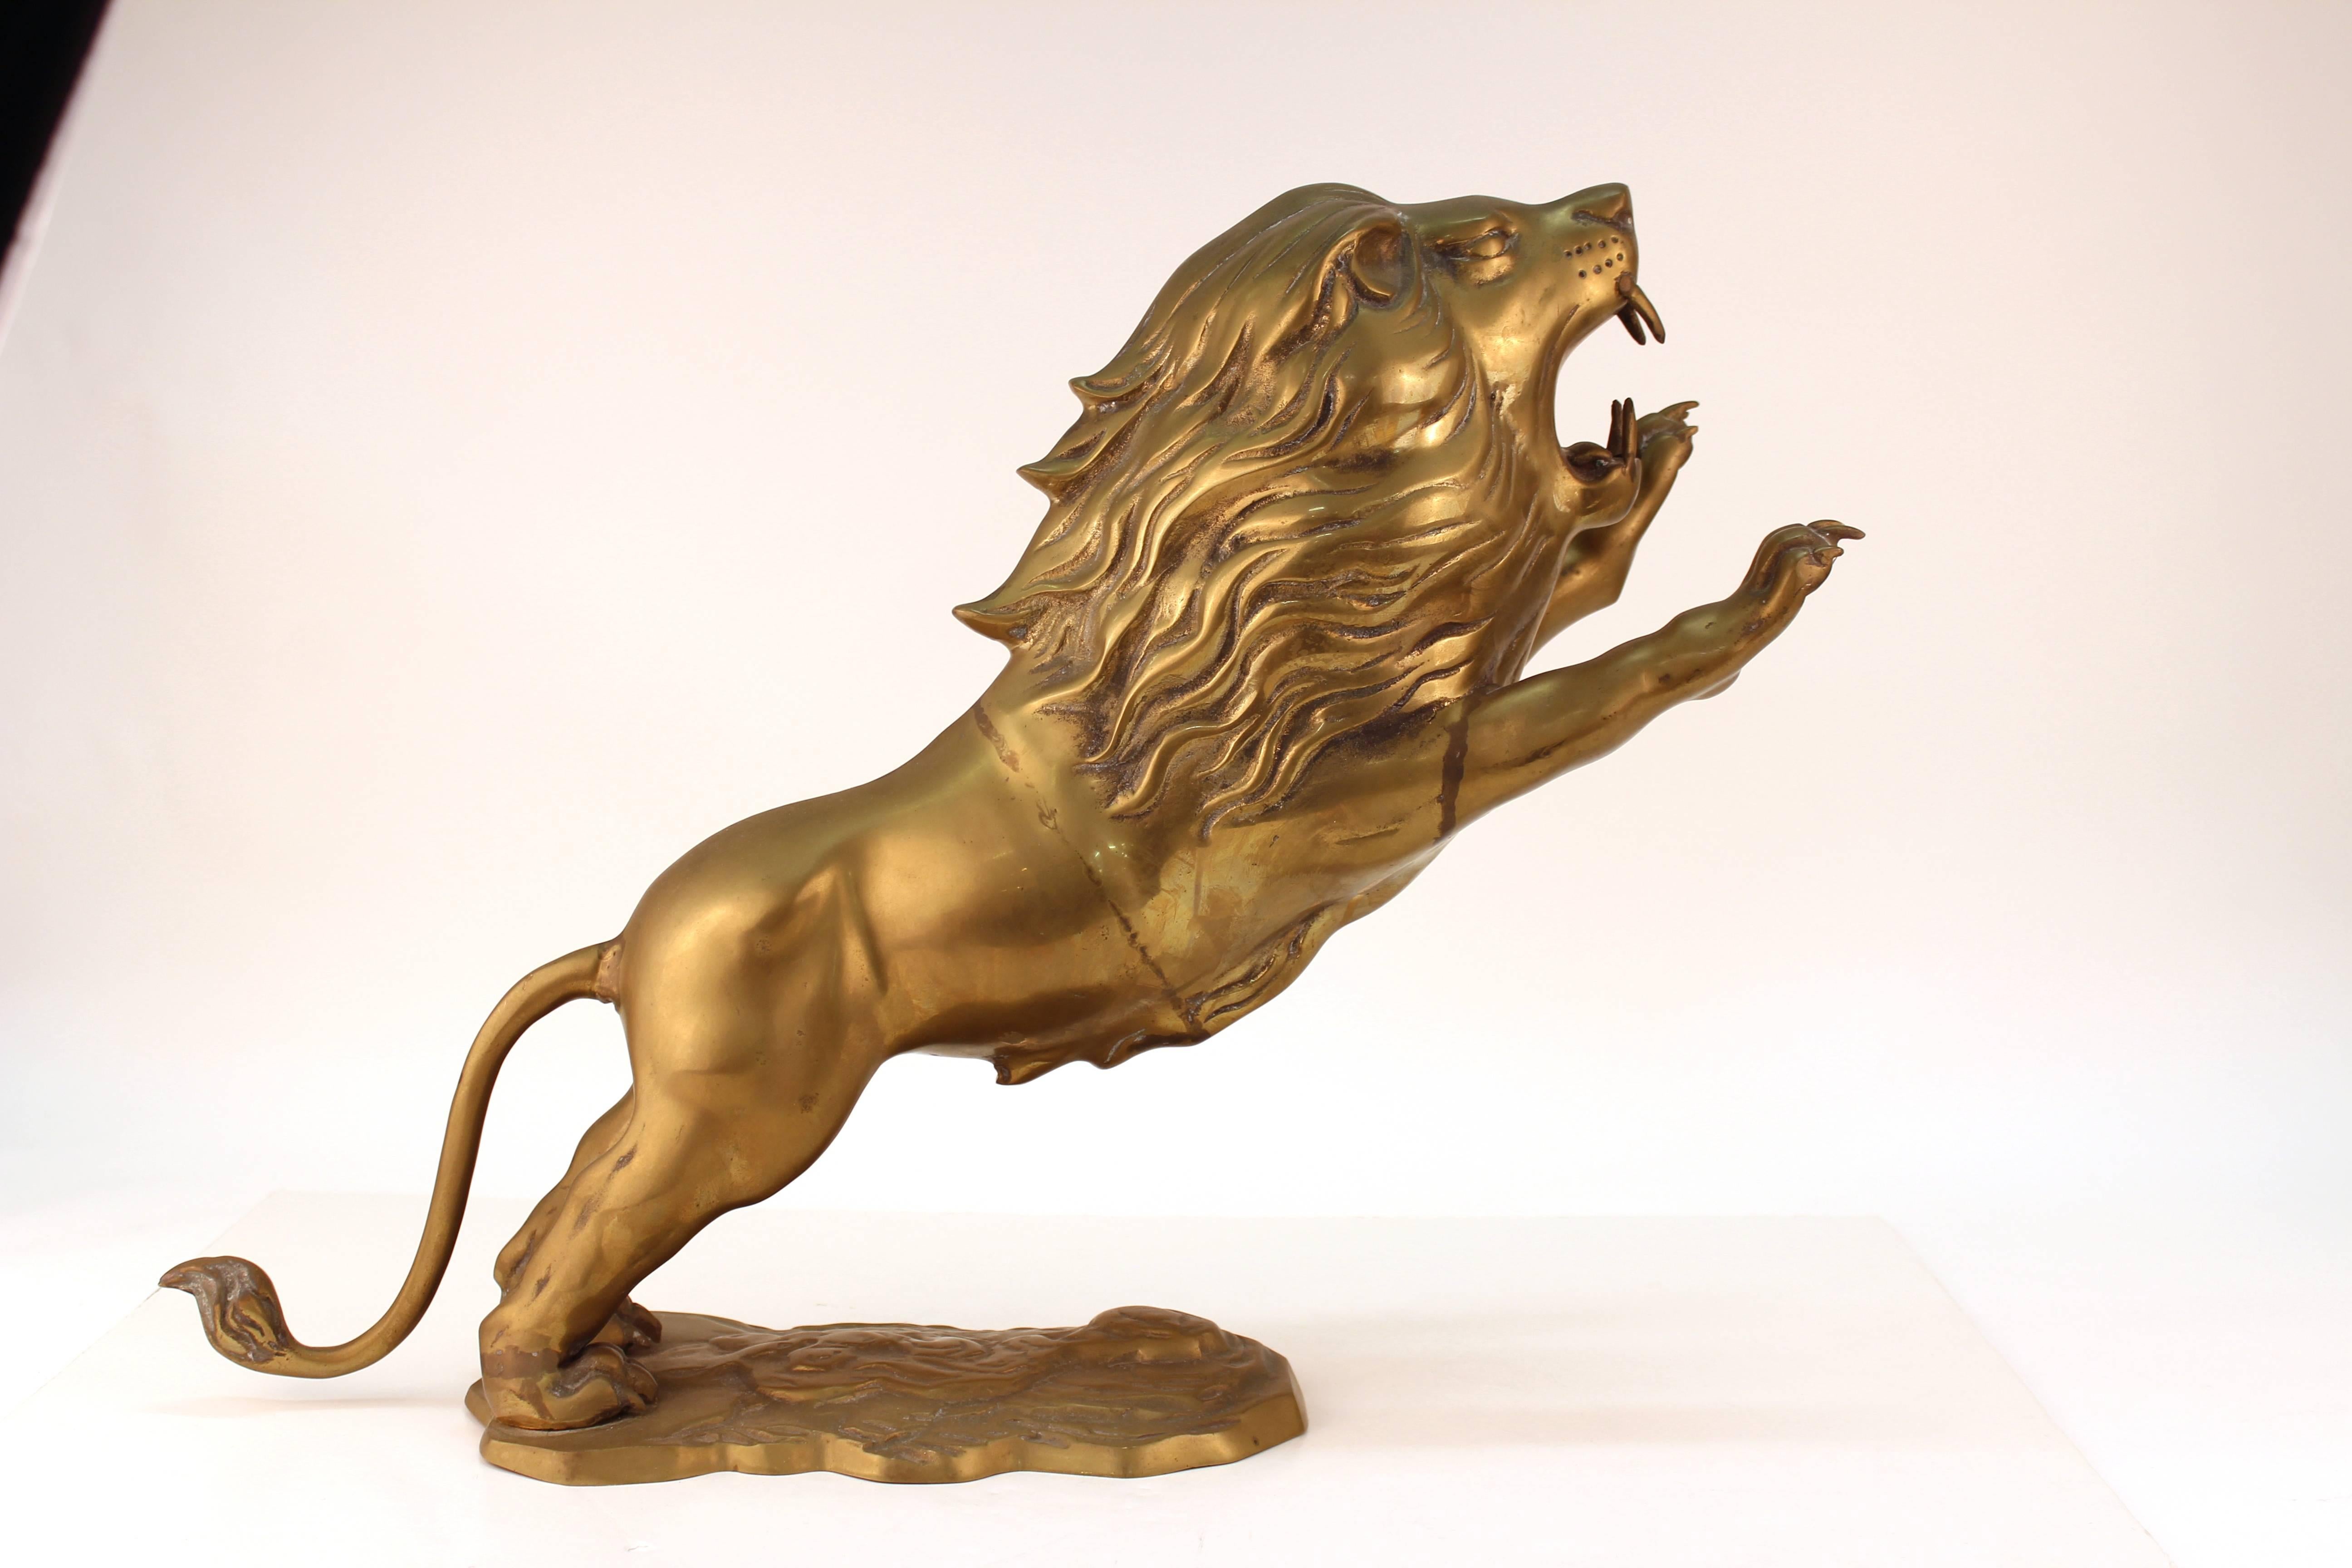 Lion sculpture in patinated brass. Depicts a snarling lion in mid-pounce. Attached to a brass base made to look like rocky earth. Some visible repairs to the lions body and arm with one claw missing. The sculpture is in good condition.